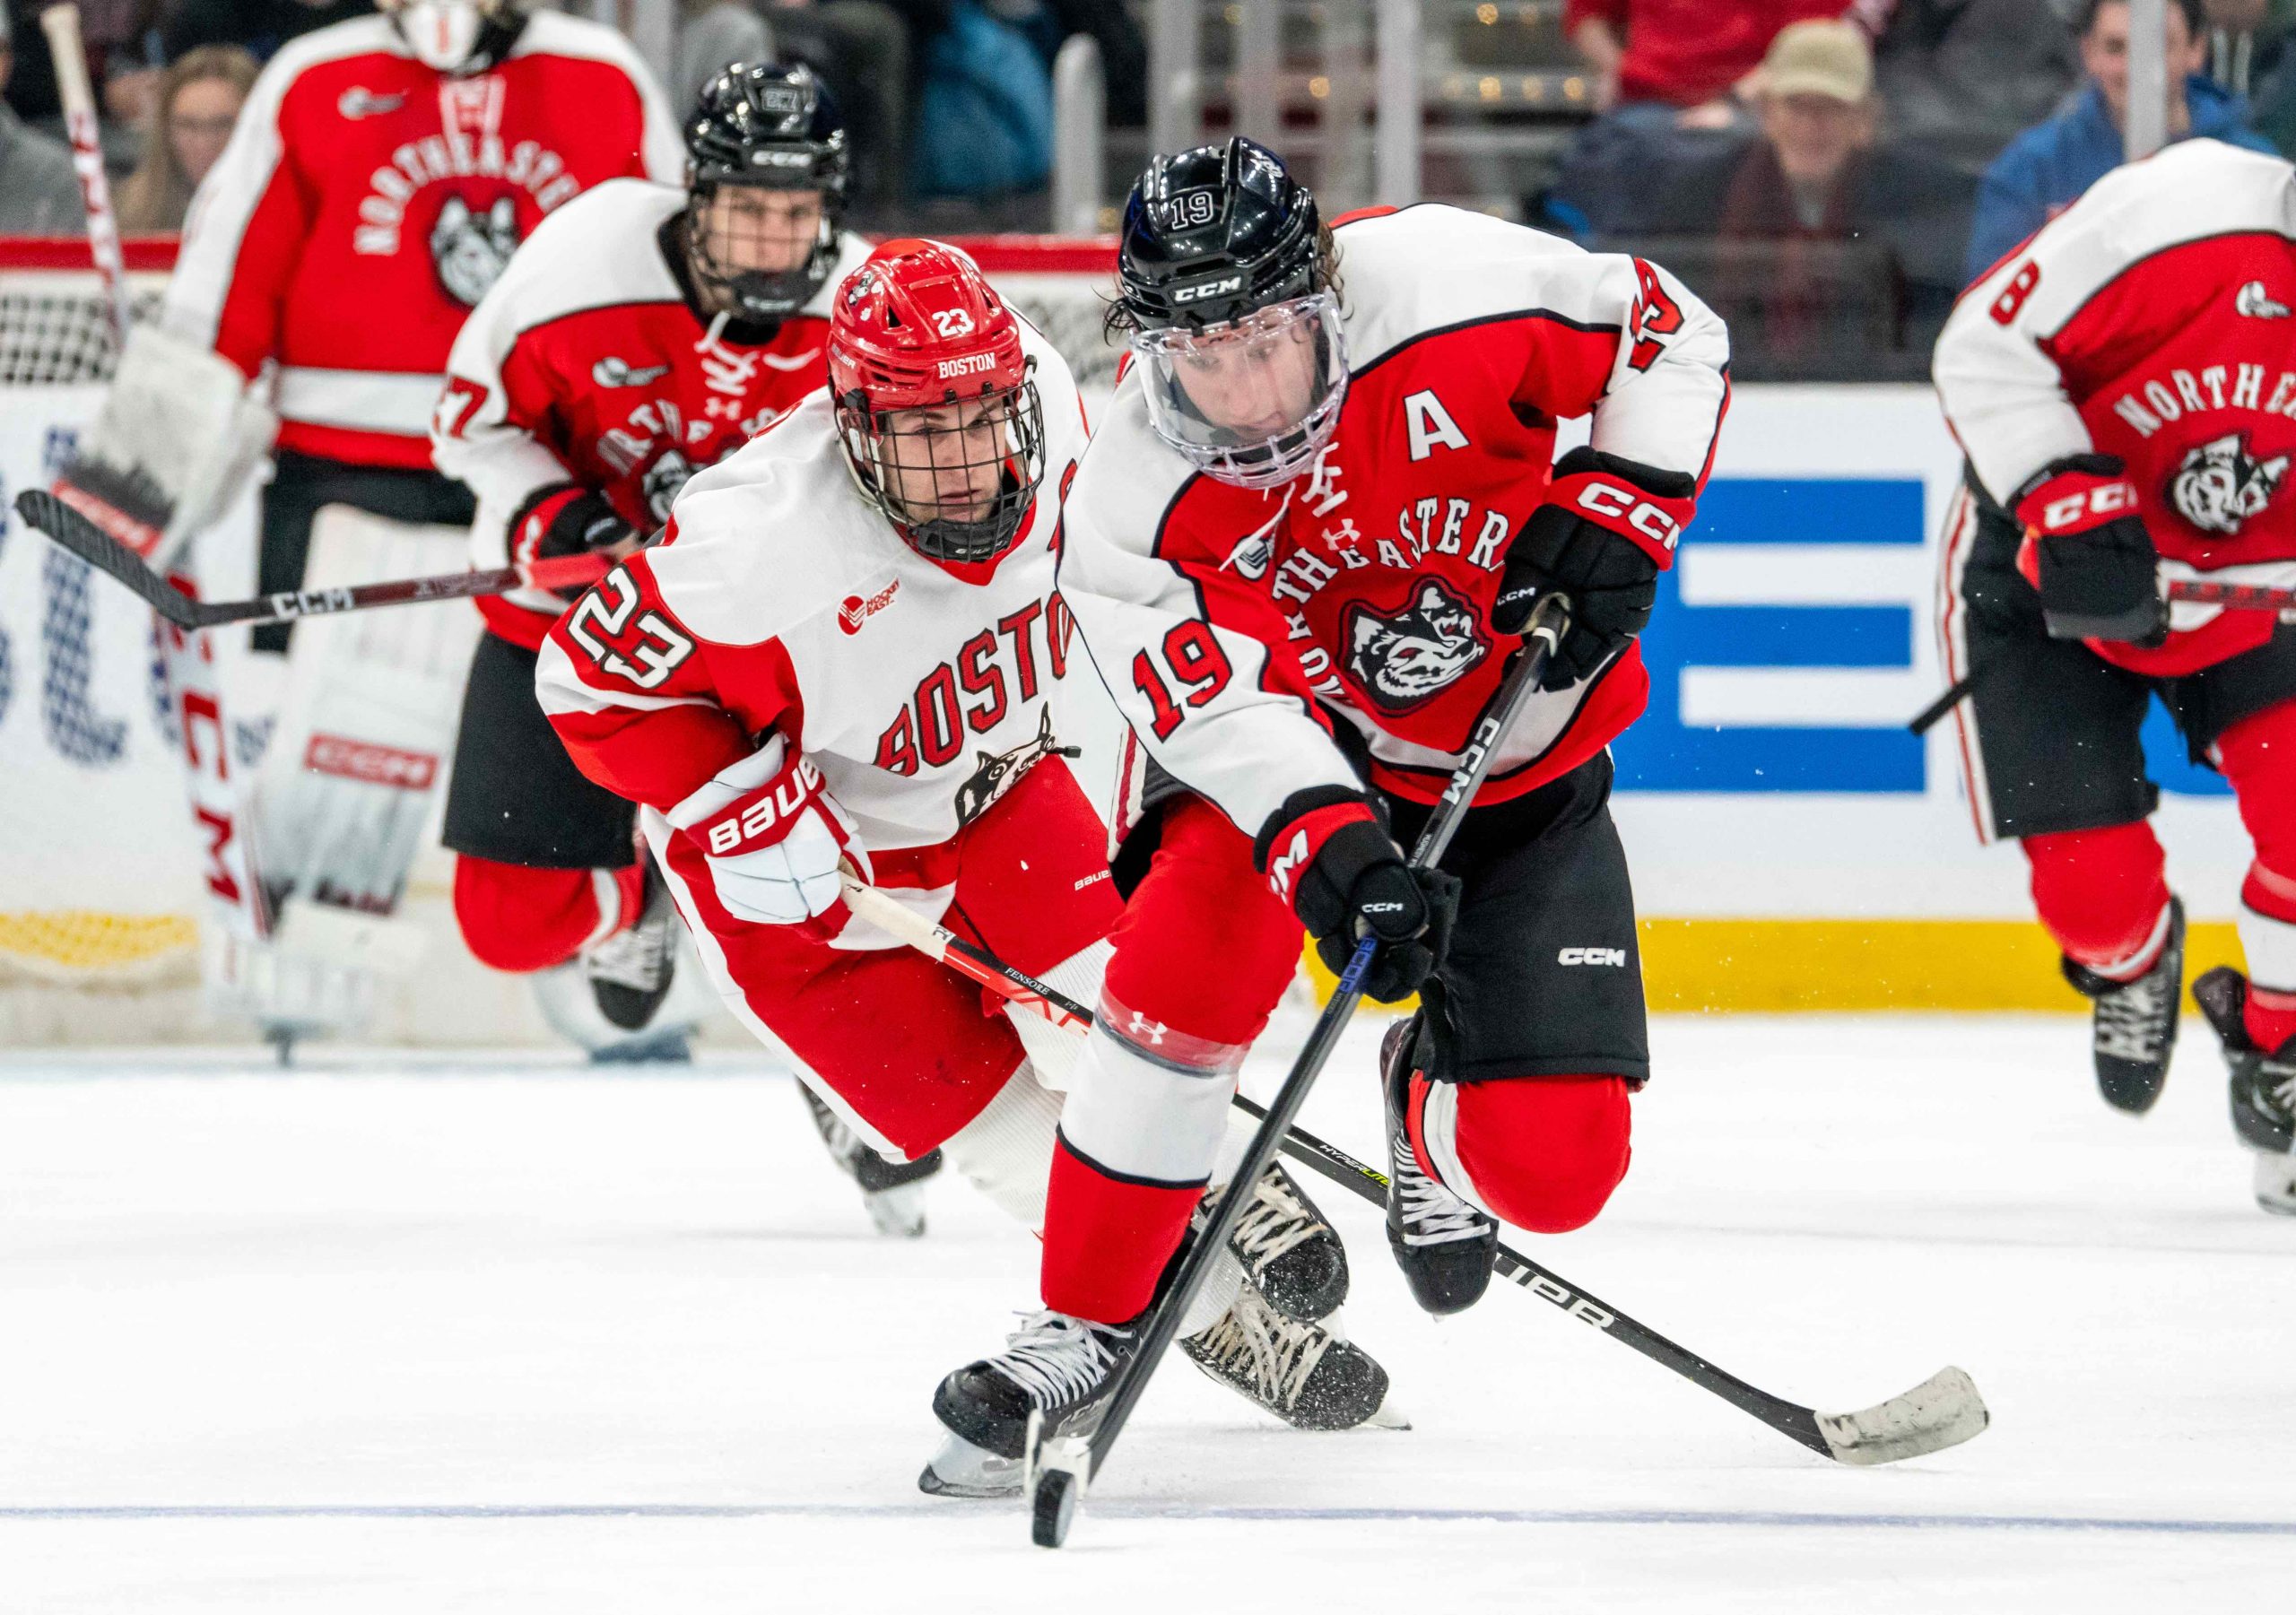 Nerves get the best of BU, as the Terriers fall to Northeastern 3-1 in Beanpot semifinals